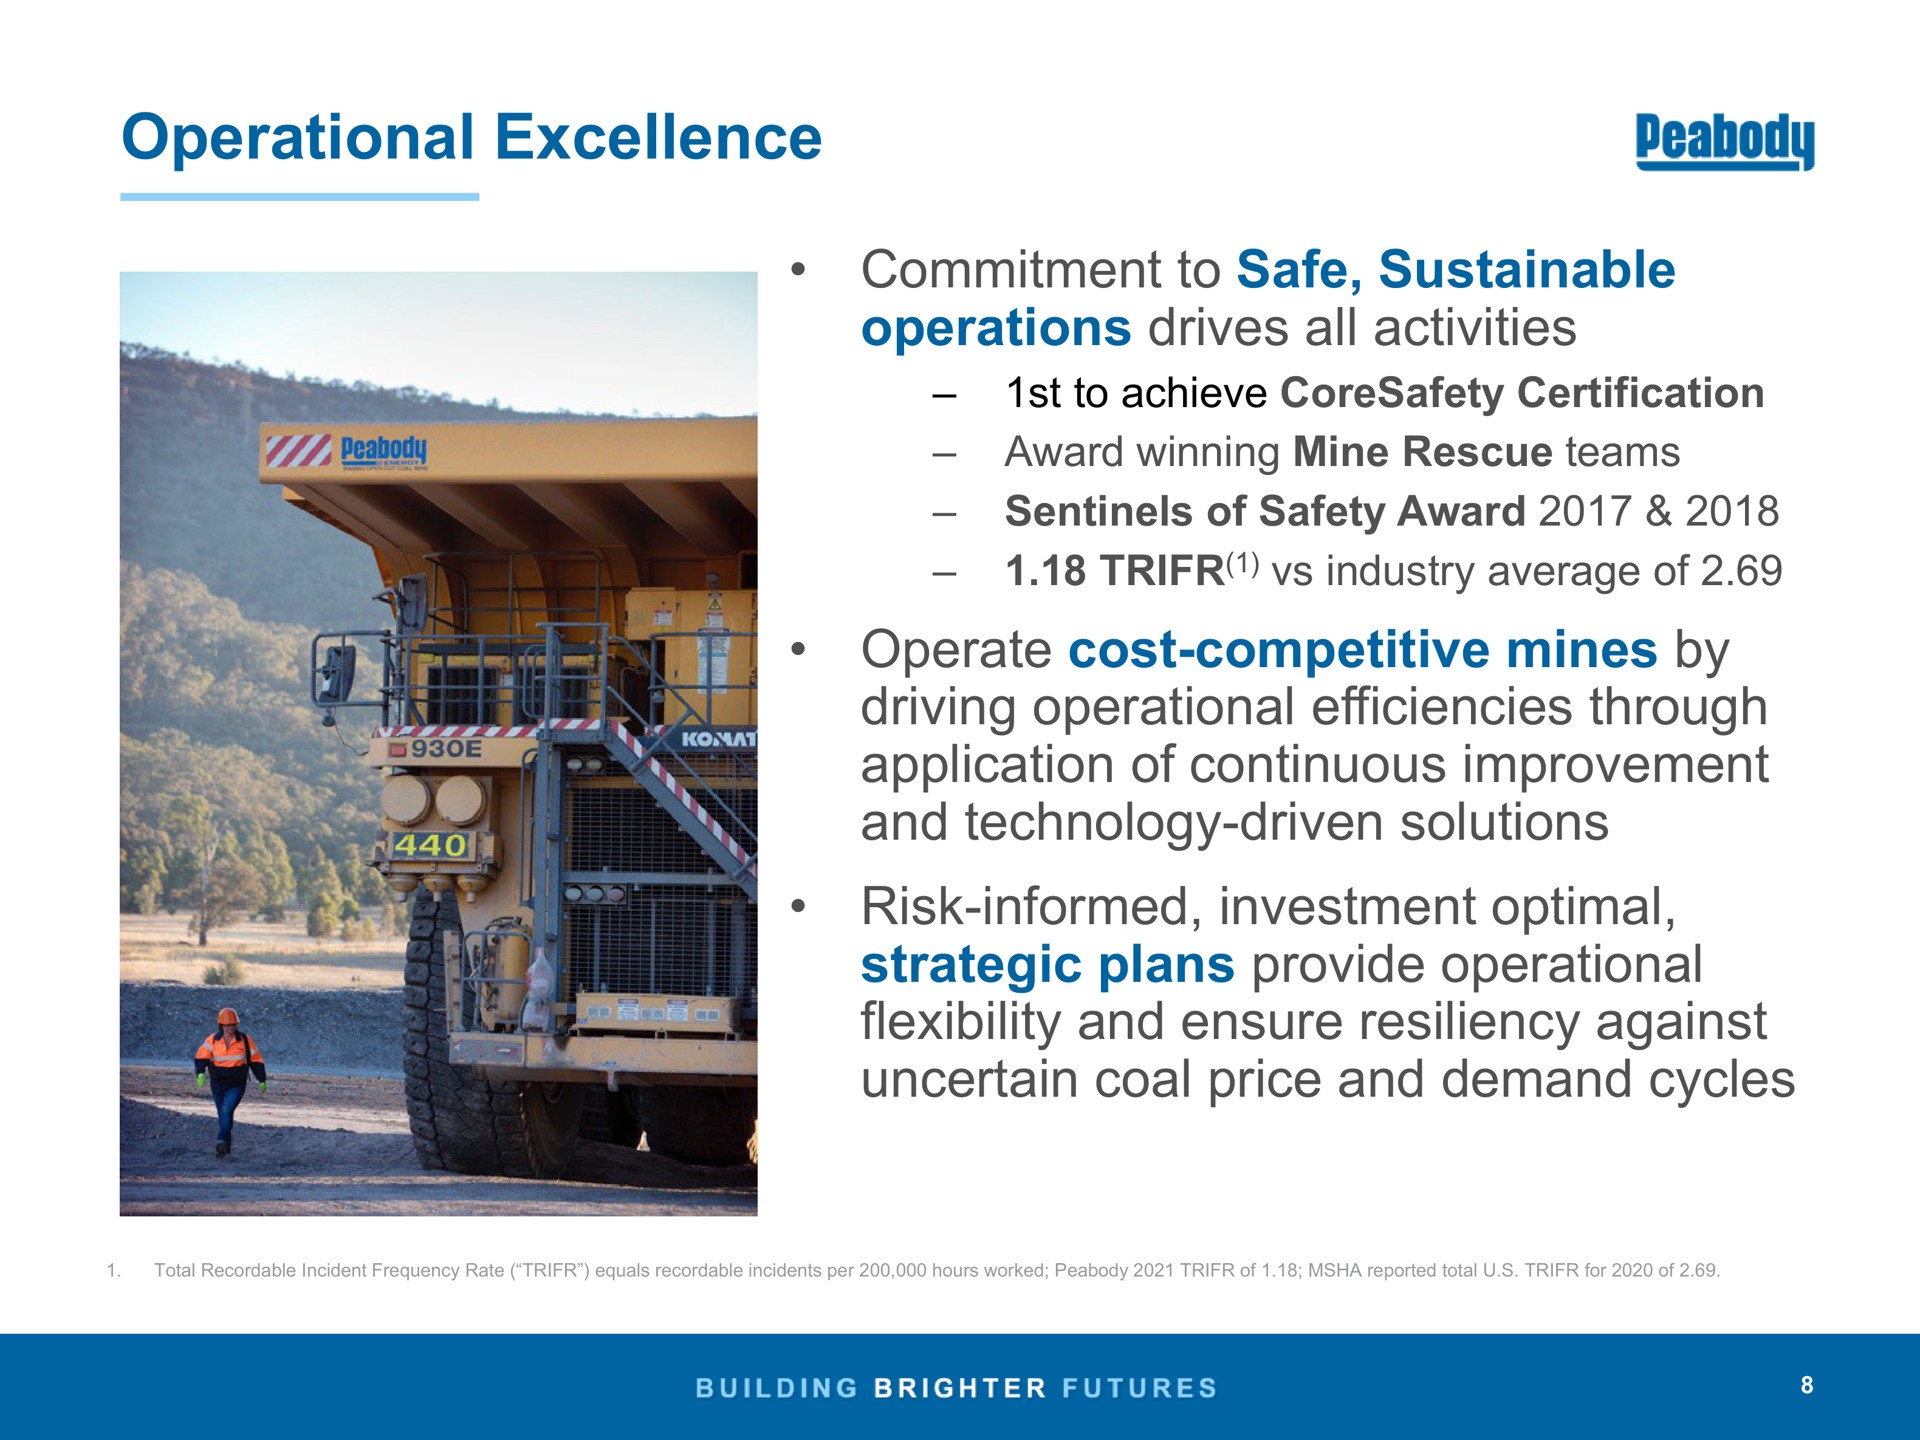 operational excellence commitment to safe sustainable operations drives all activities operate cost competitive mines by driving operational efficiencies through application of continuous improvement and technology driven solutions risk informed investment optimal strategic plans provide operational flexibility and ensure resiliency against uncertain coal price and demand cycles | Peabody Energy